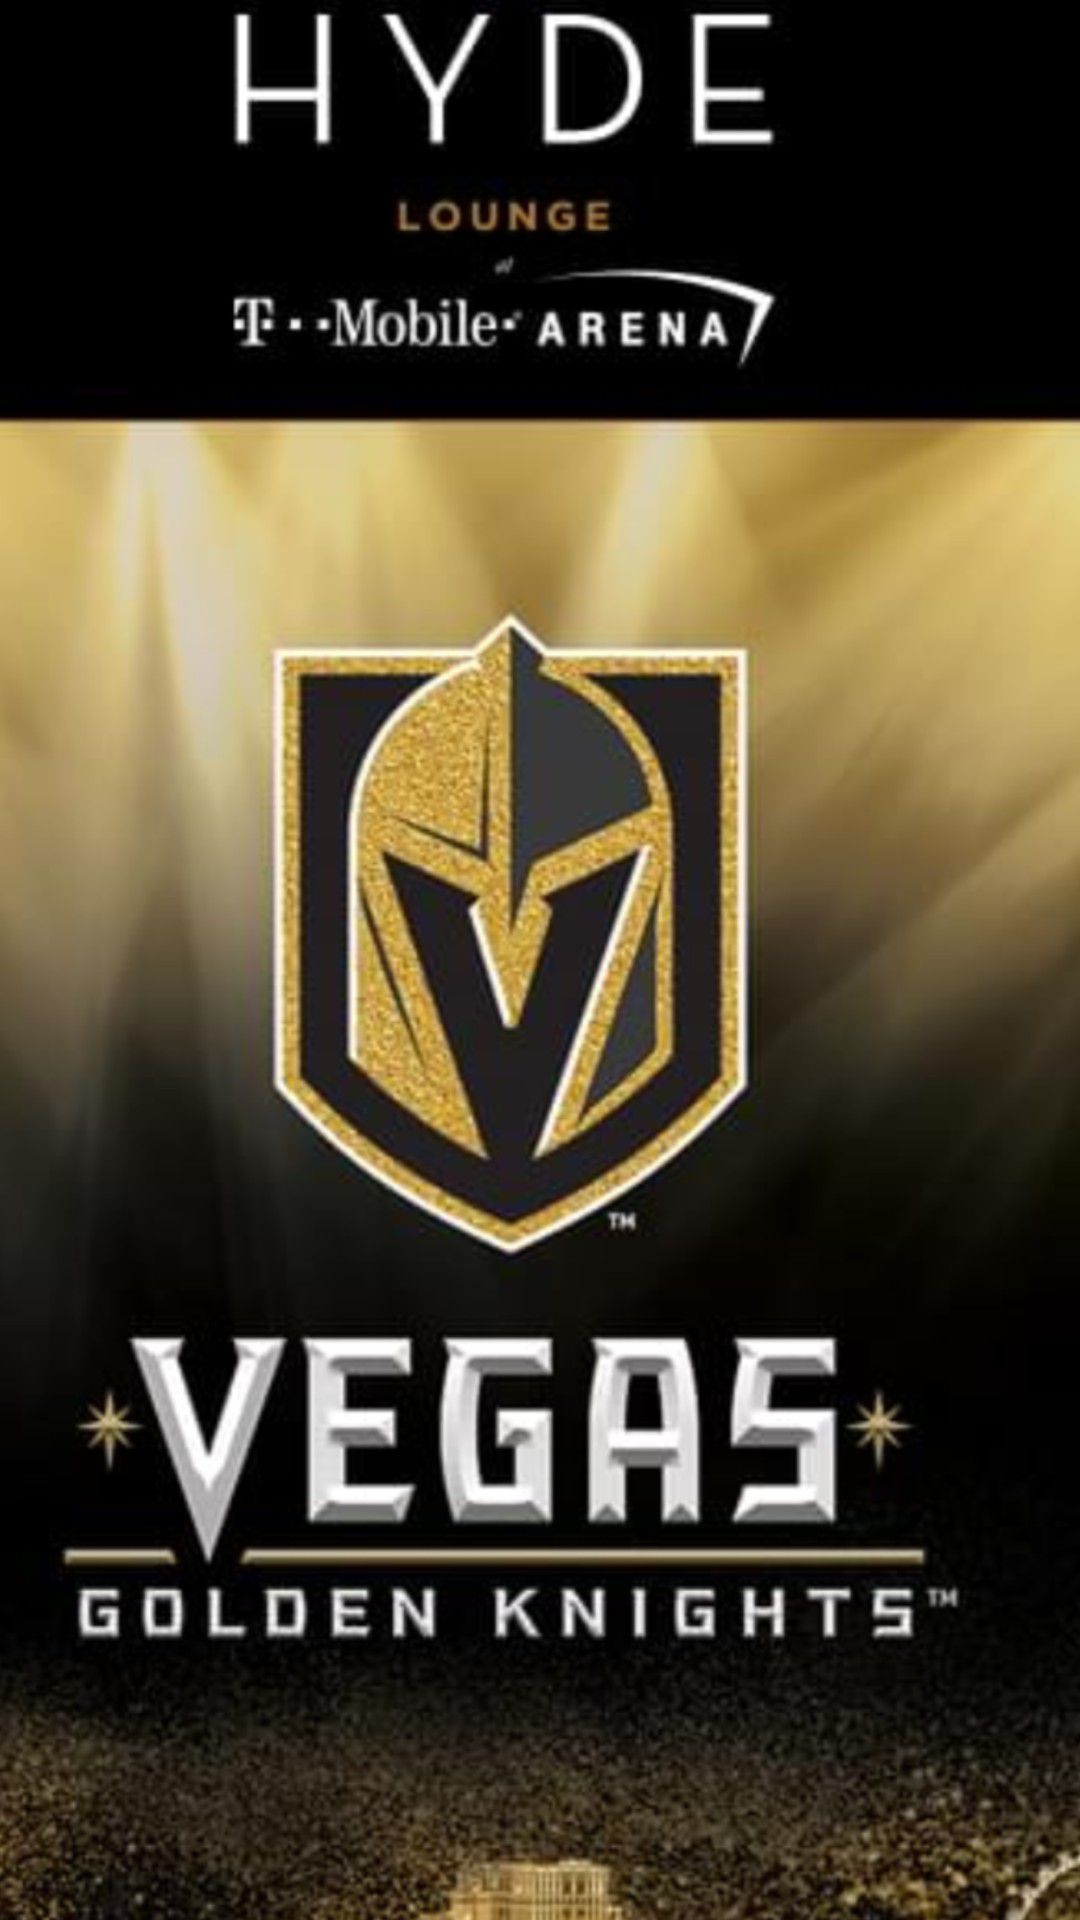 Golden knights vs. Flames Tickets